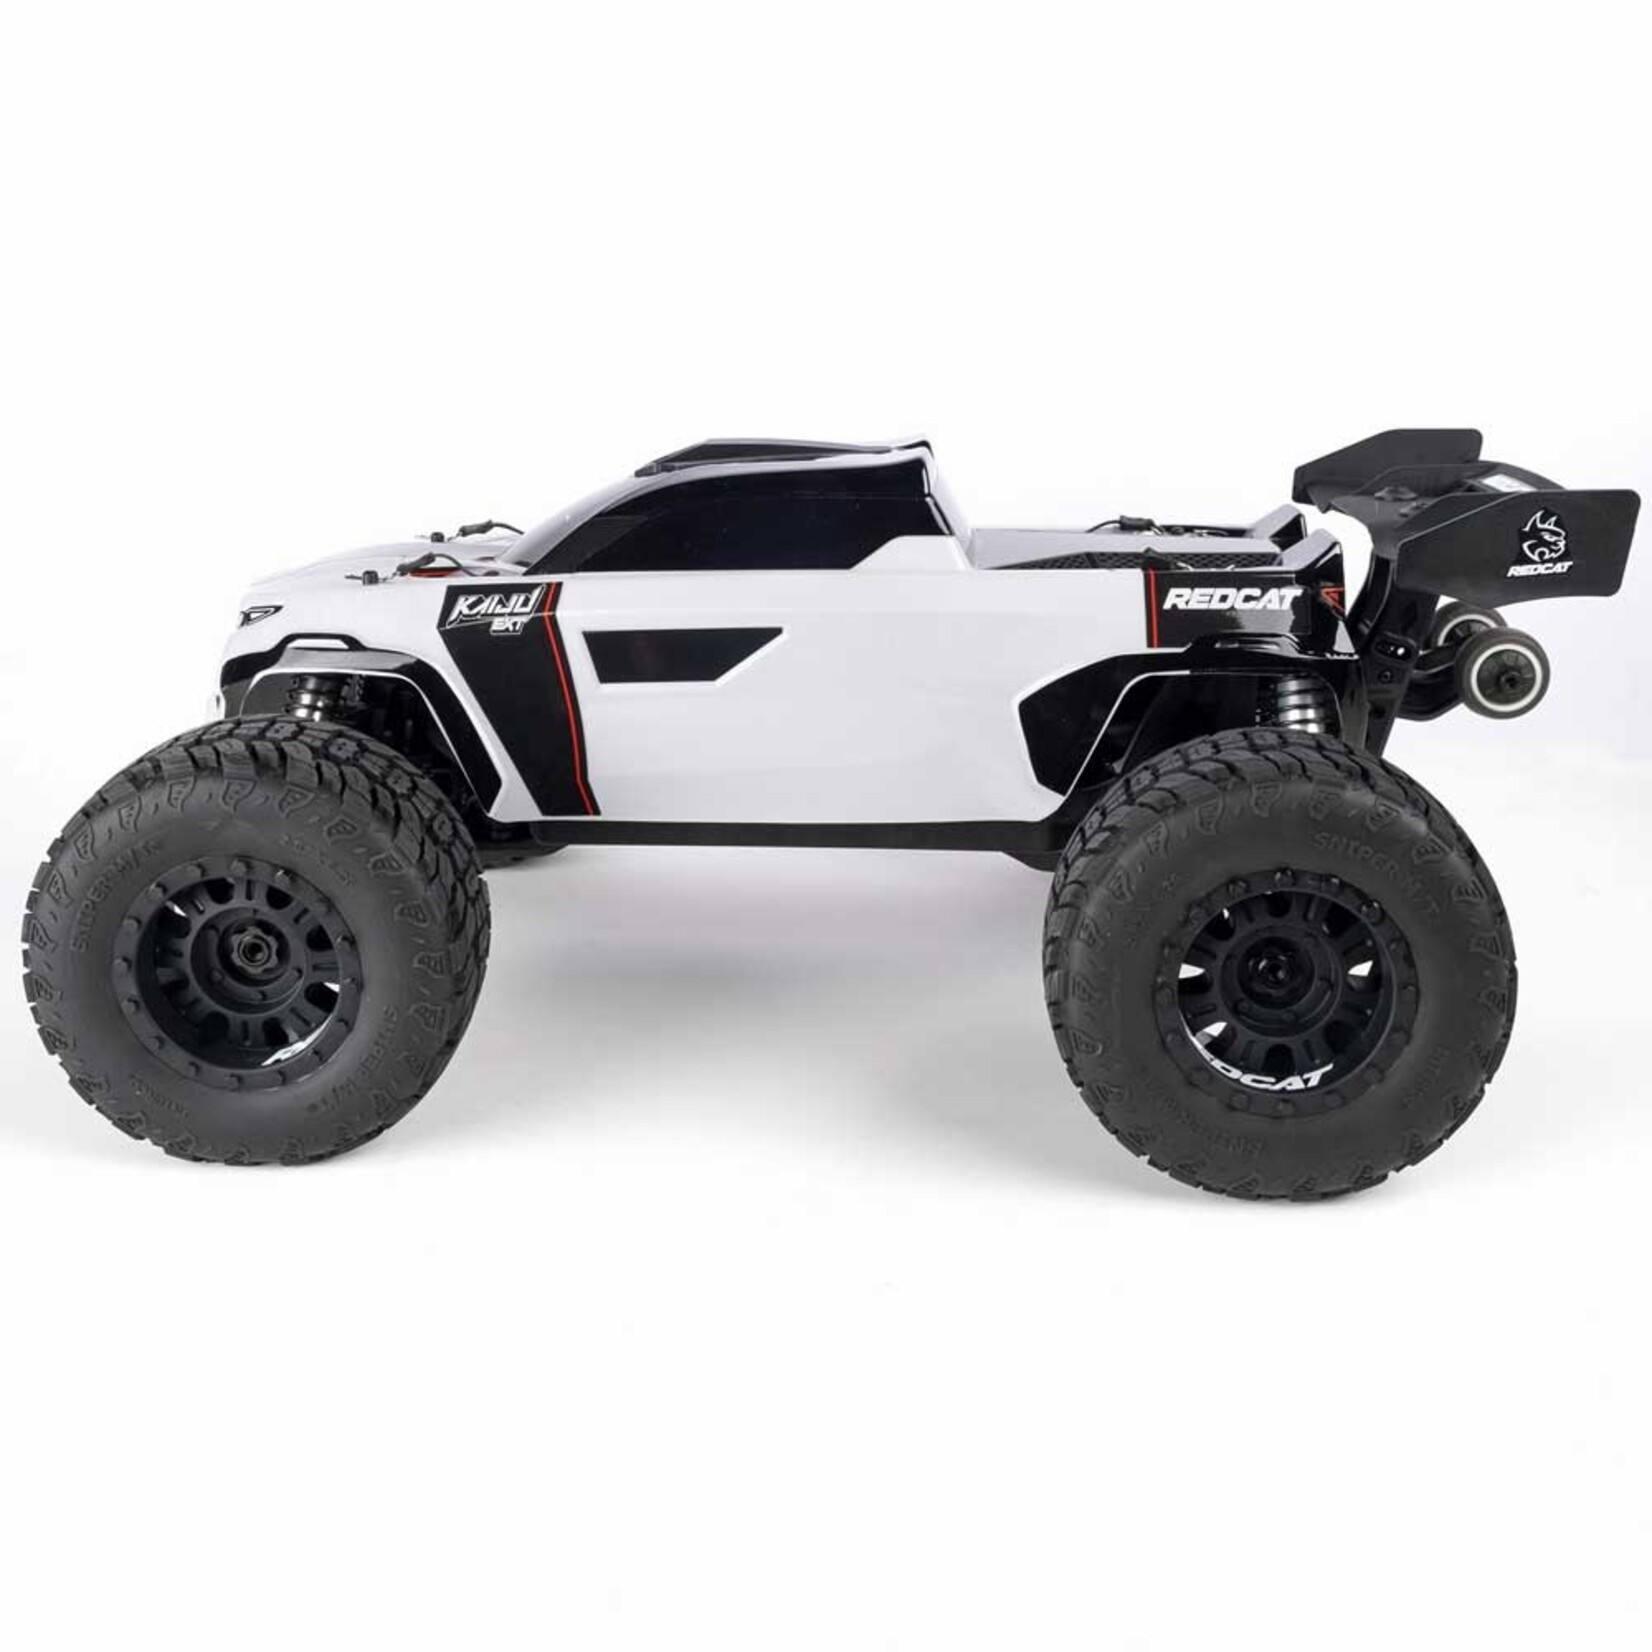 Redcat Racing Kaiju EXT 1/8 RTR 4WD 6S Brushless Monster Truck (White)